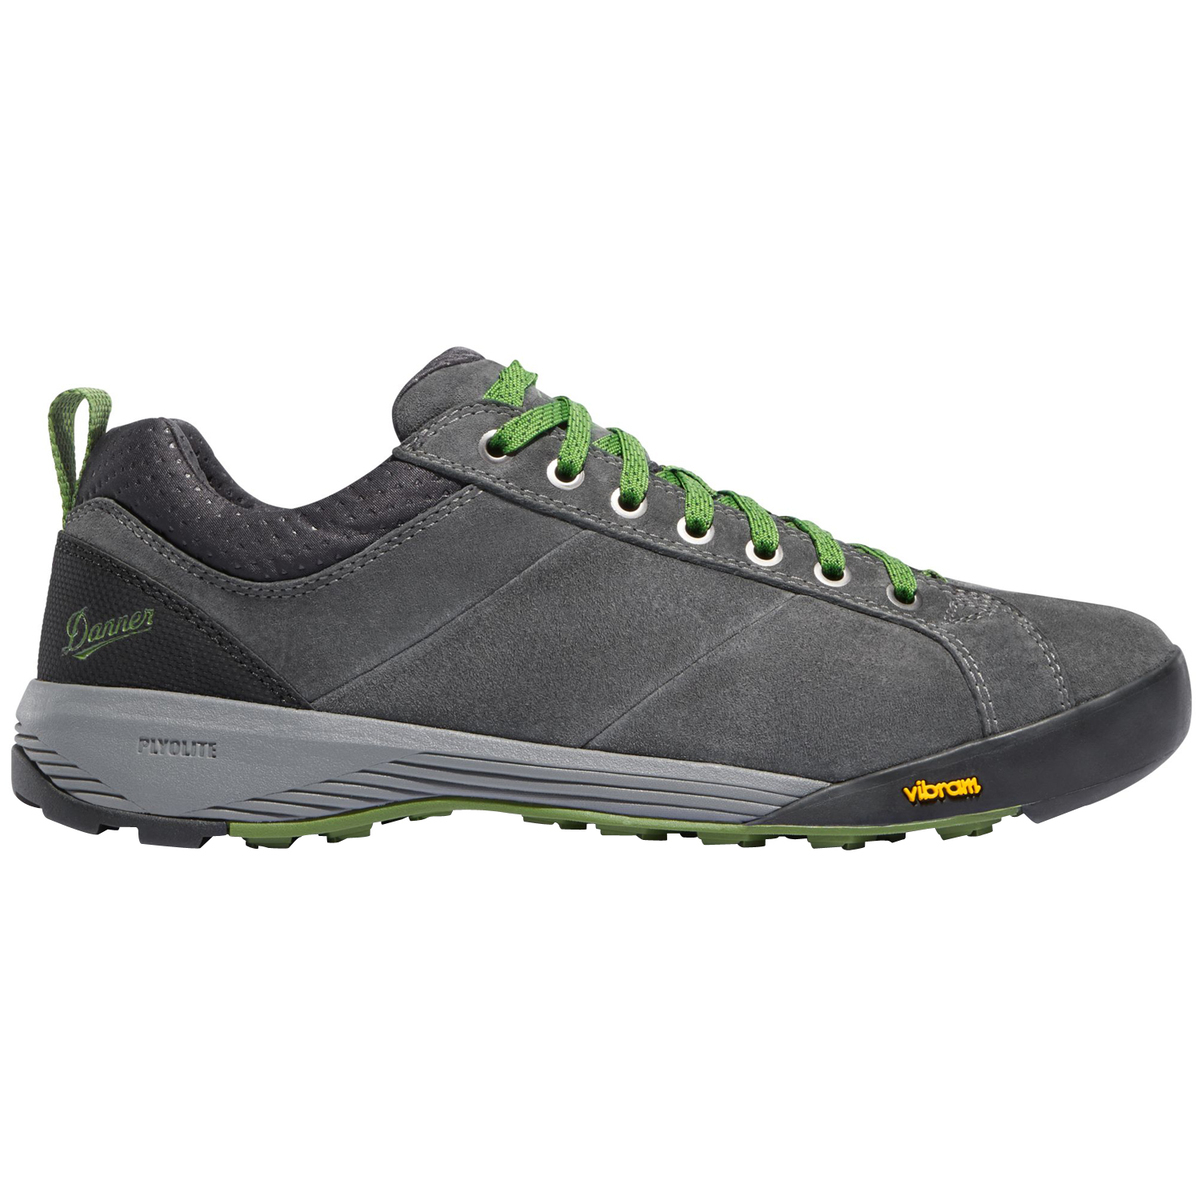 Danner Men's Camp Sherman Low Hiking Shoes - Gray - Size 11.5 D - Gray ...